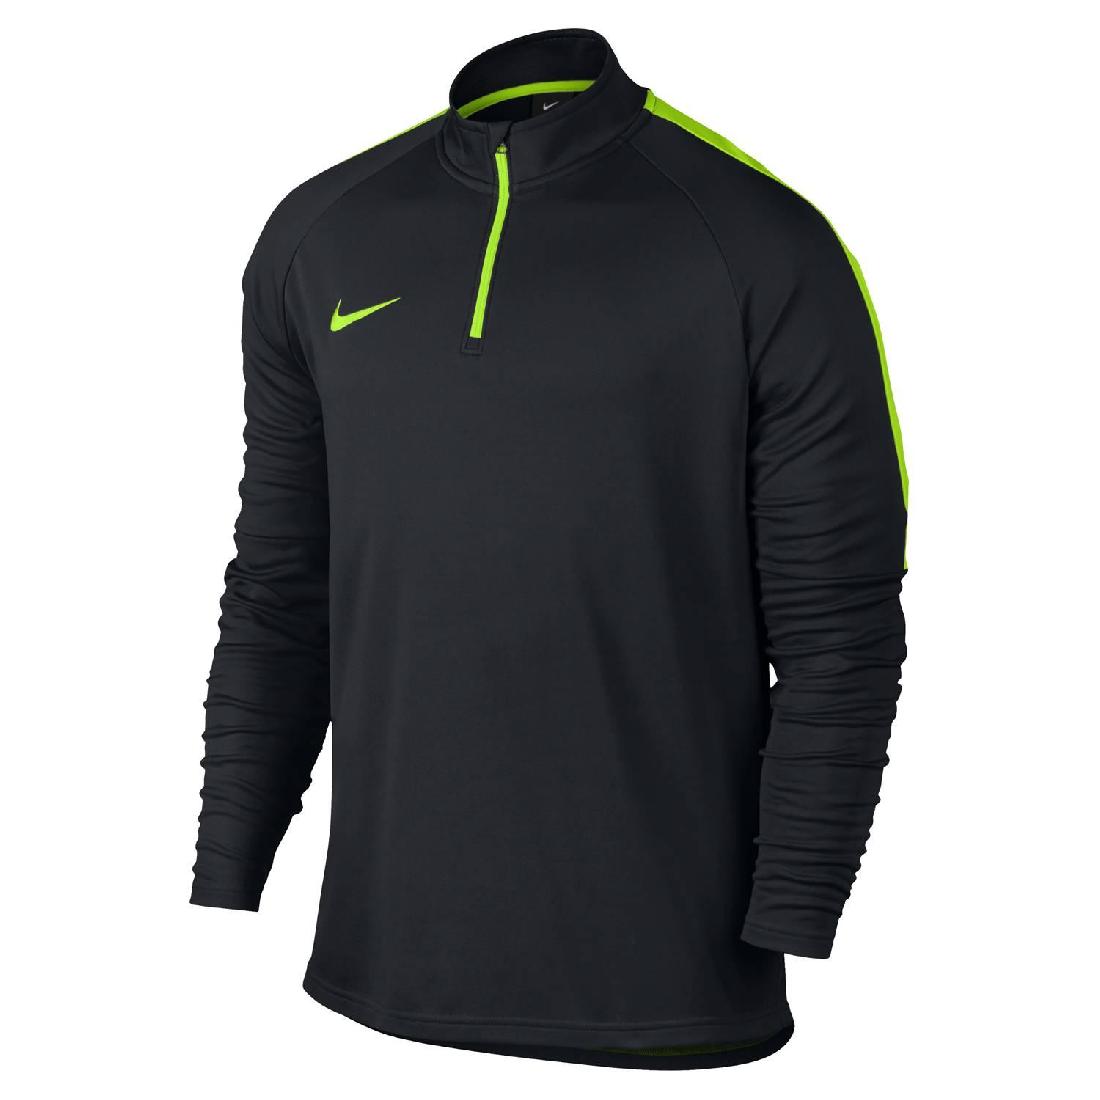   . NIKE DRY DRIL TOP ACDMY (SP17) 839344-011    